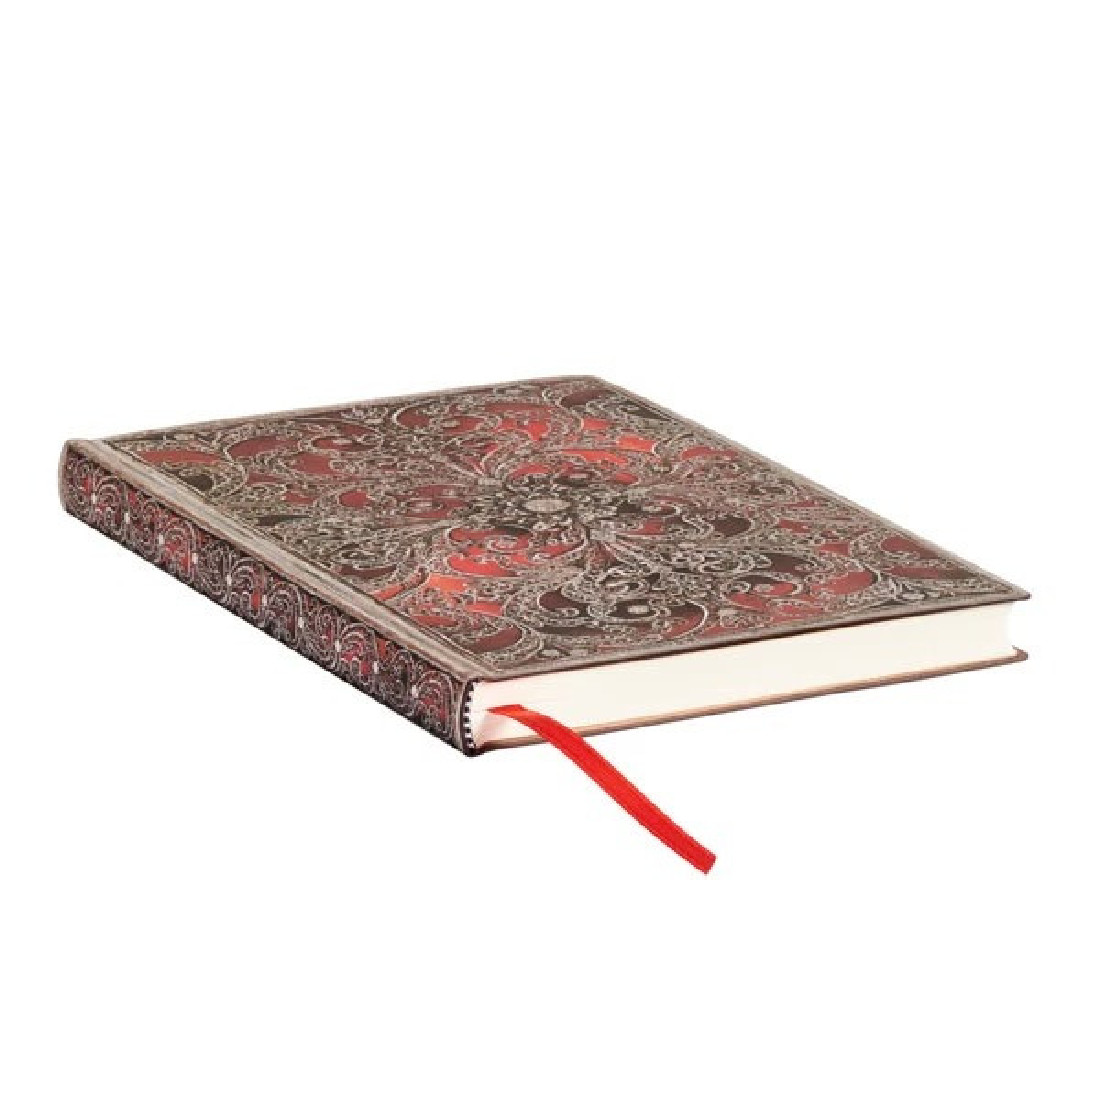 Paperblanks notebook, softcover, flexi, silver filigree collection, Ganrt, midi 13x17cm, 176 pages, lined, 100g